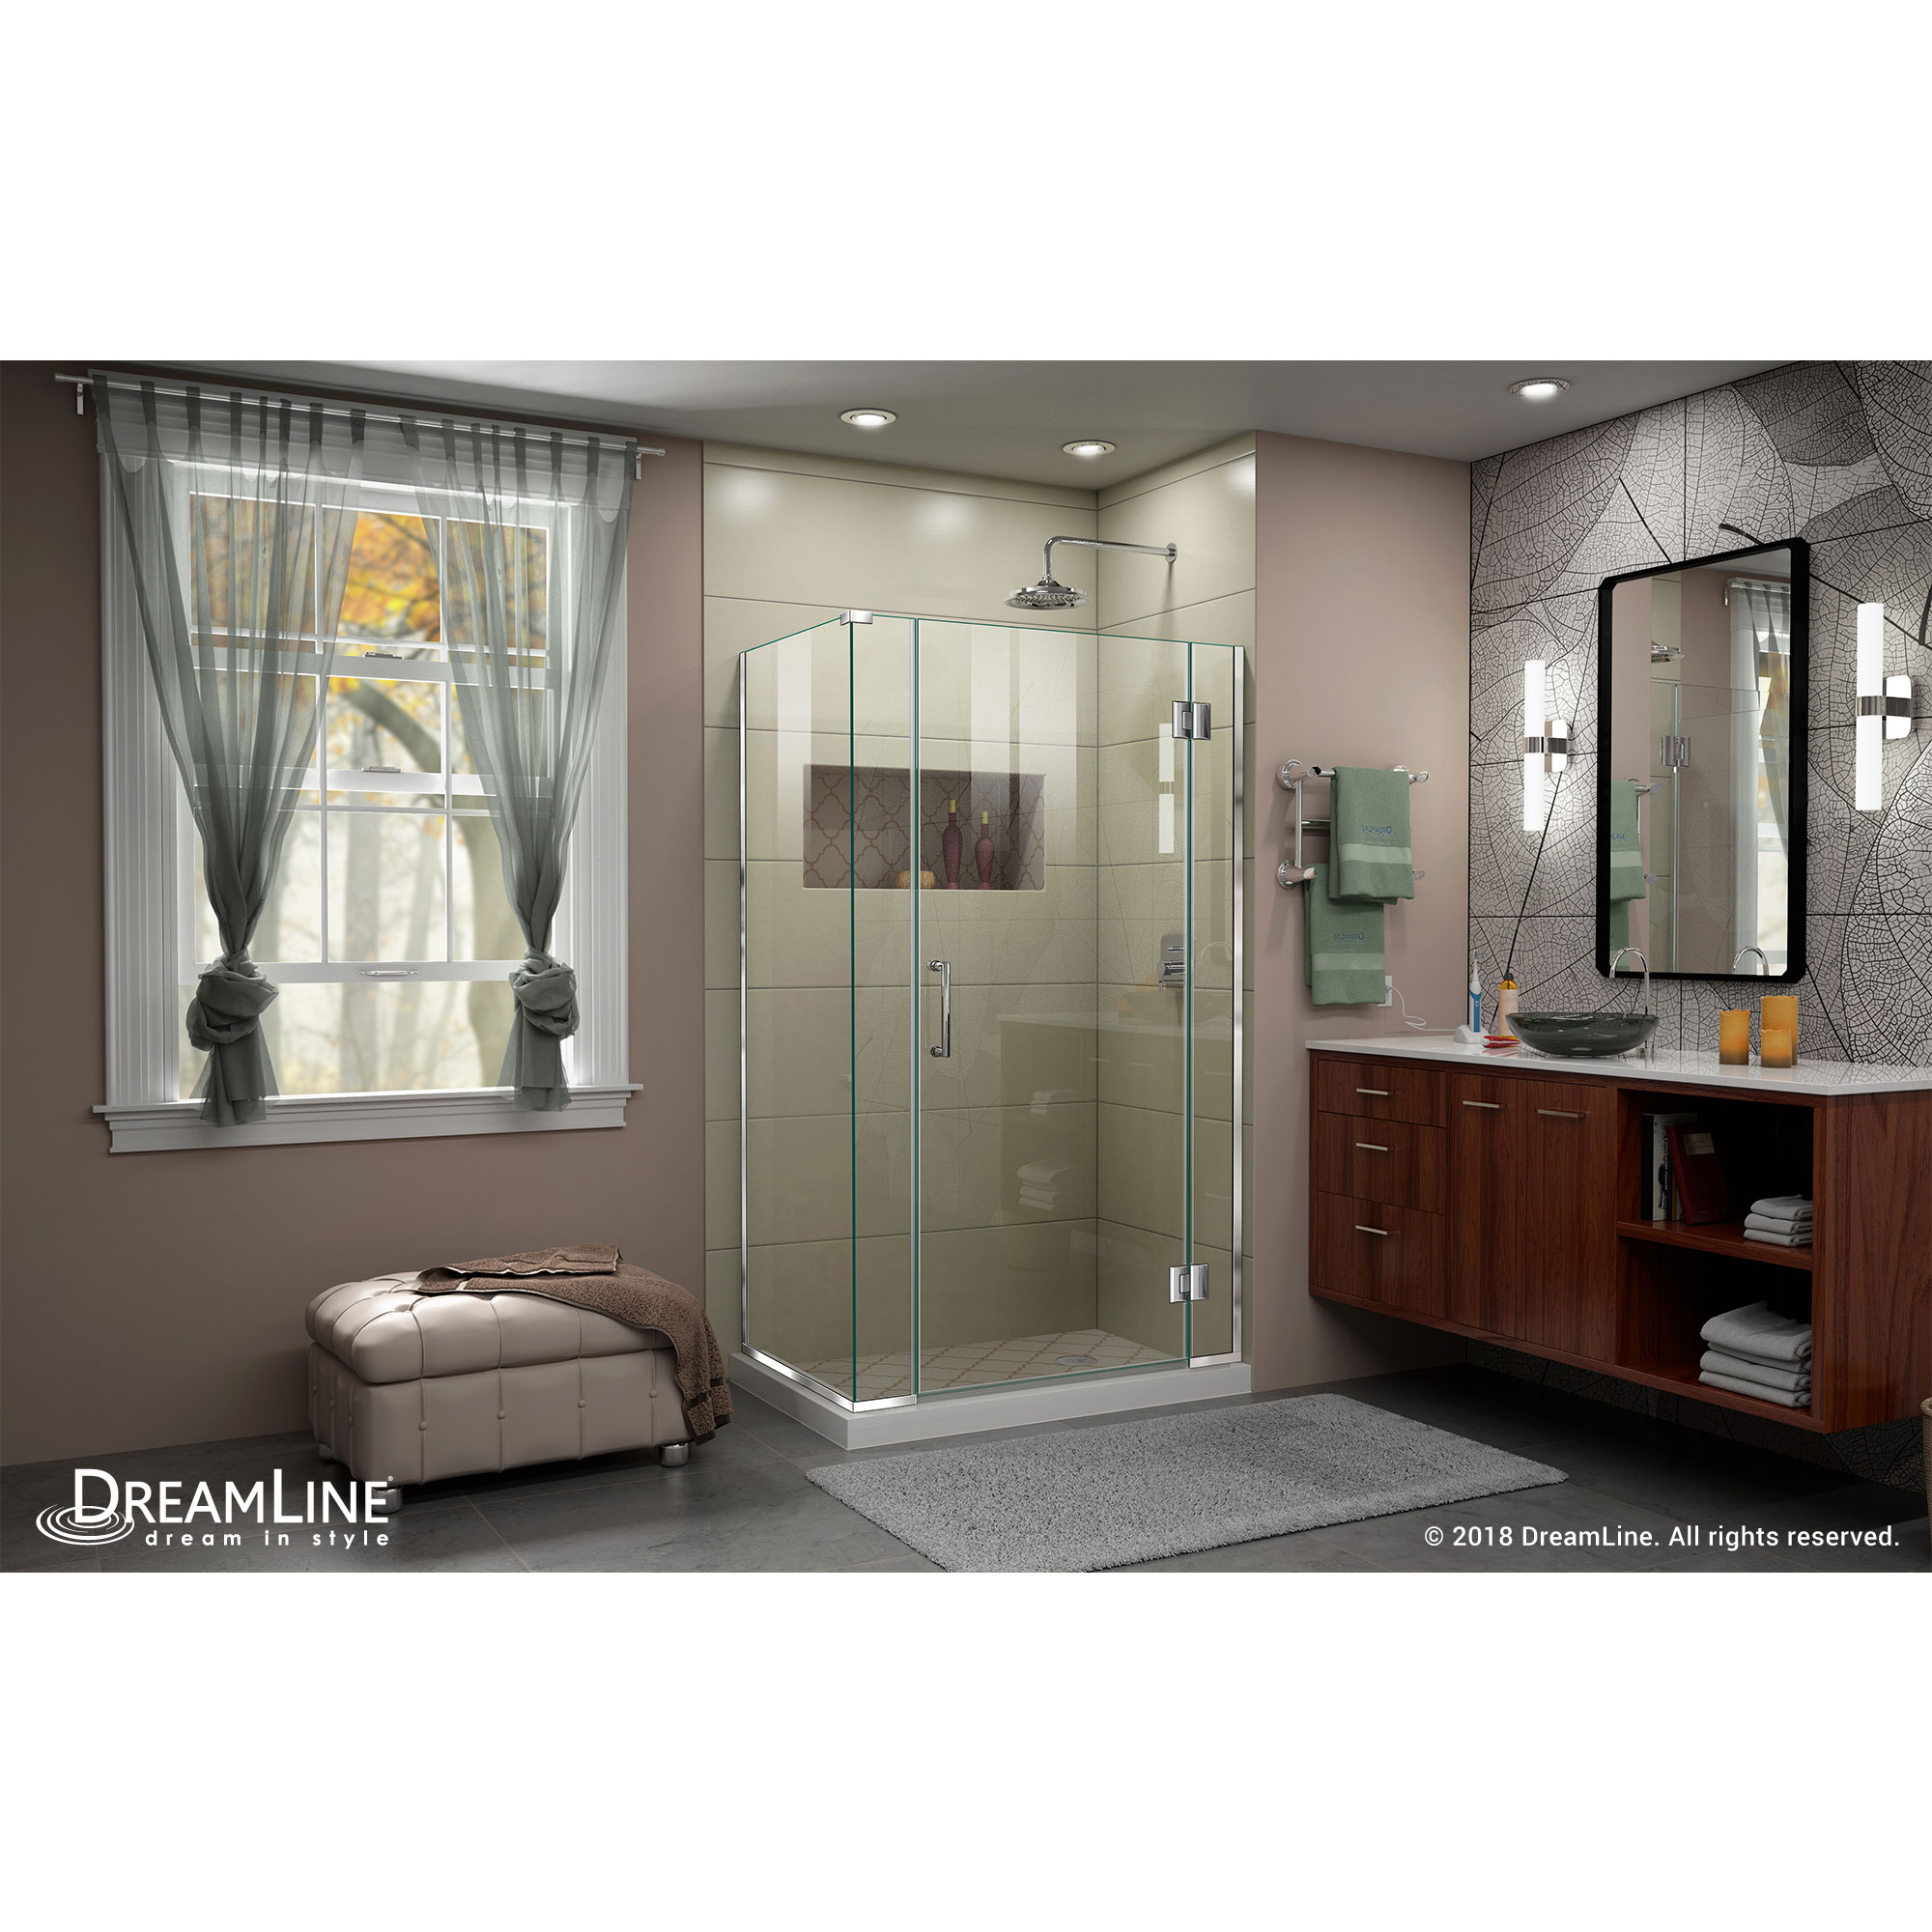 DreamLine Unidoor-X 40 1/2 in. W x 30 3/8 in. D x 72 in. H Frameless Hinged Shower Enclosure in Chrome